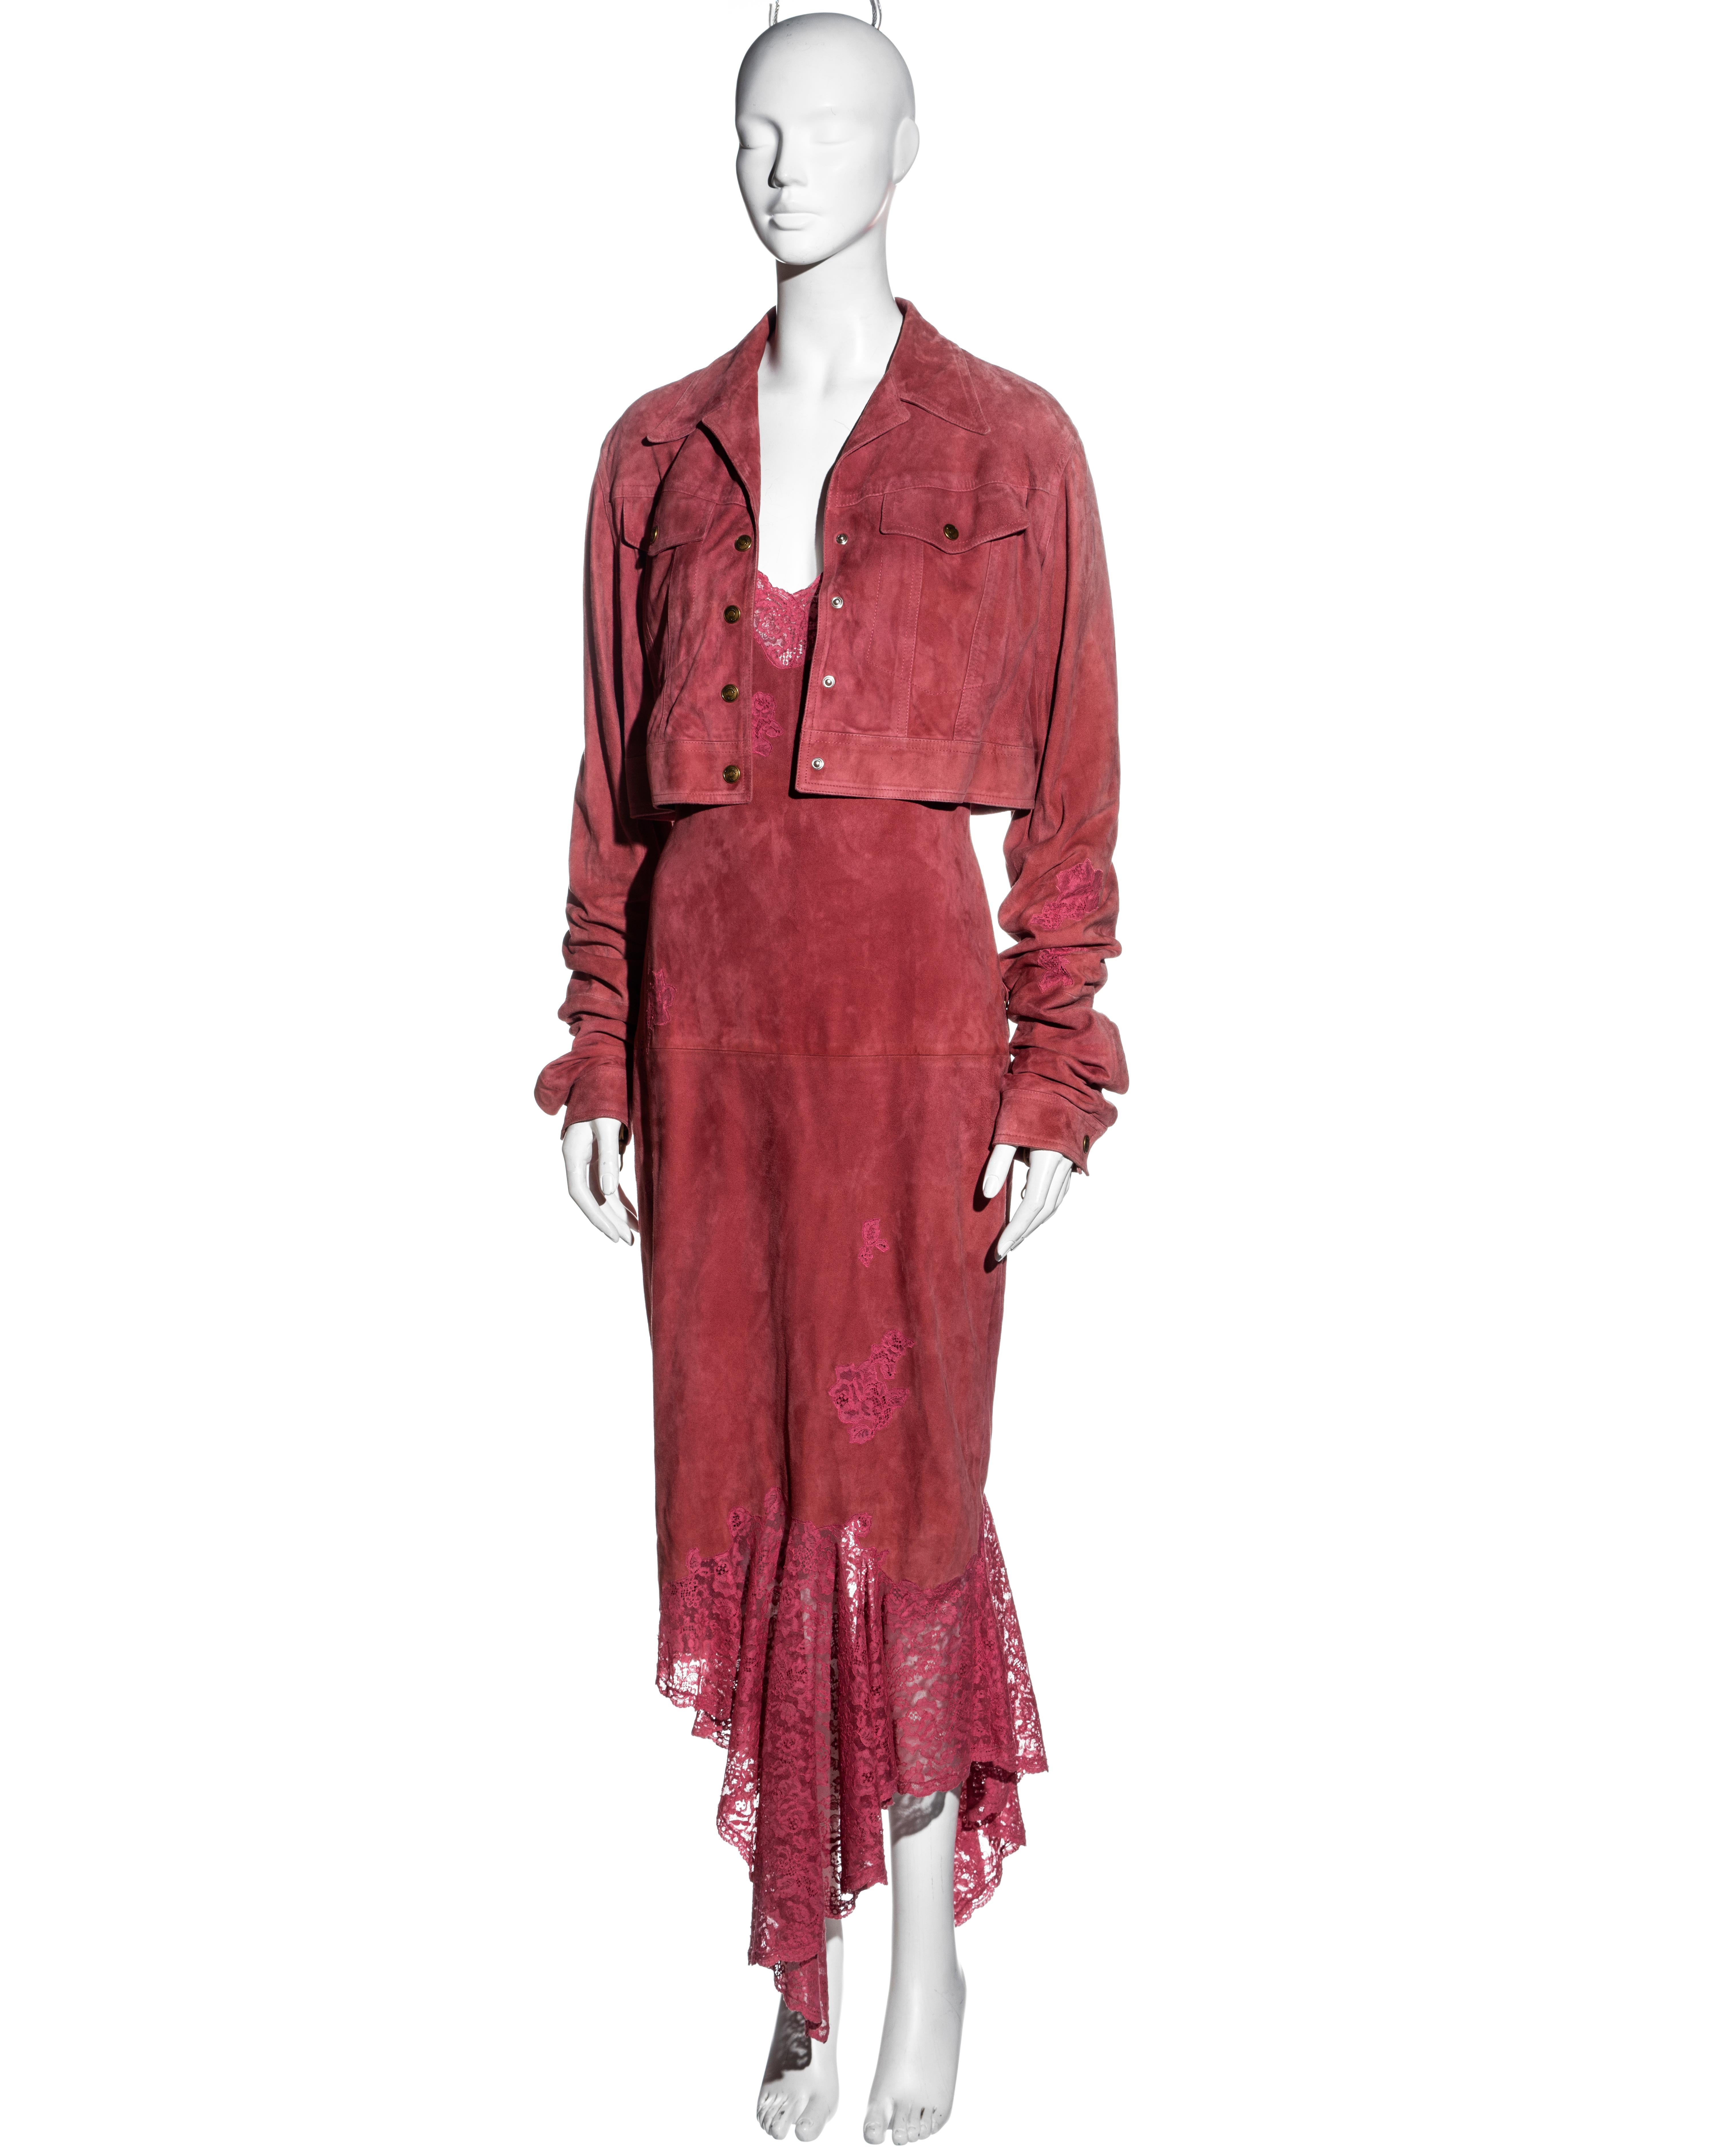 Christian Dior by John Galliano pink suede and lace dress and jacket, fw 2000 For Sale 2